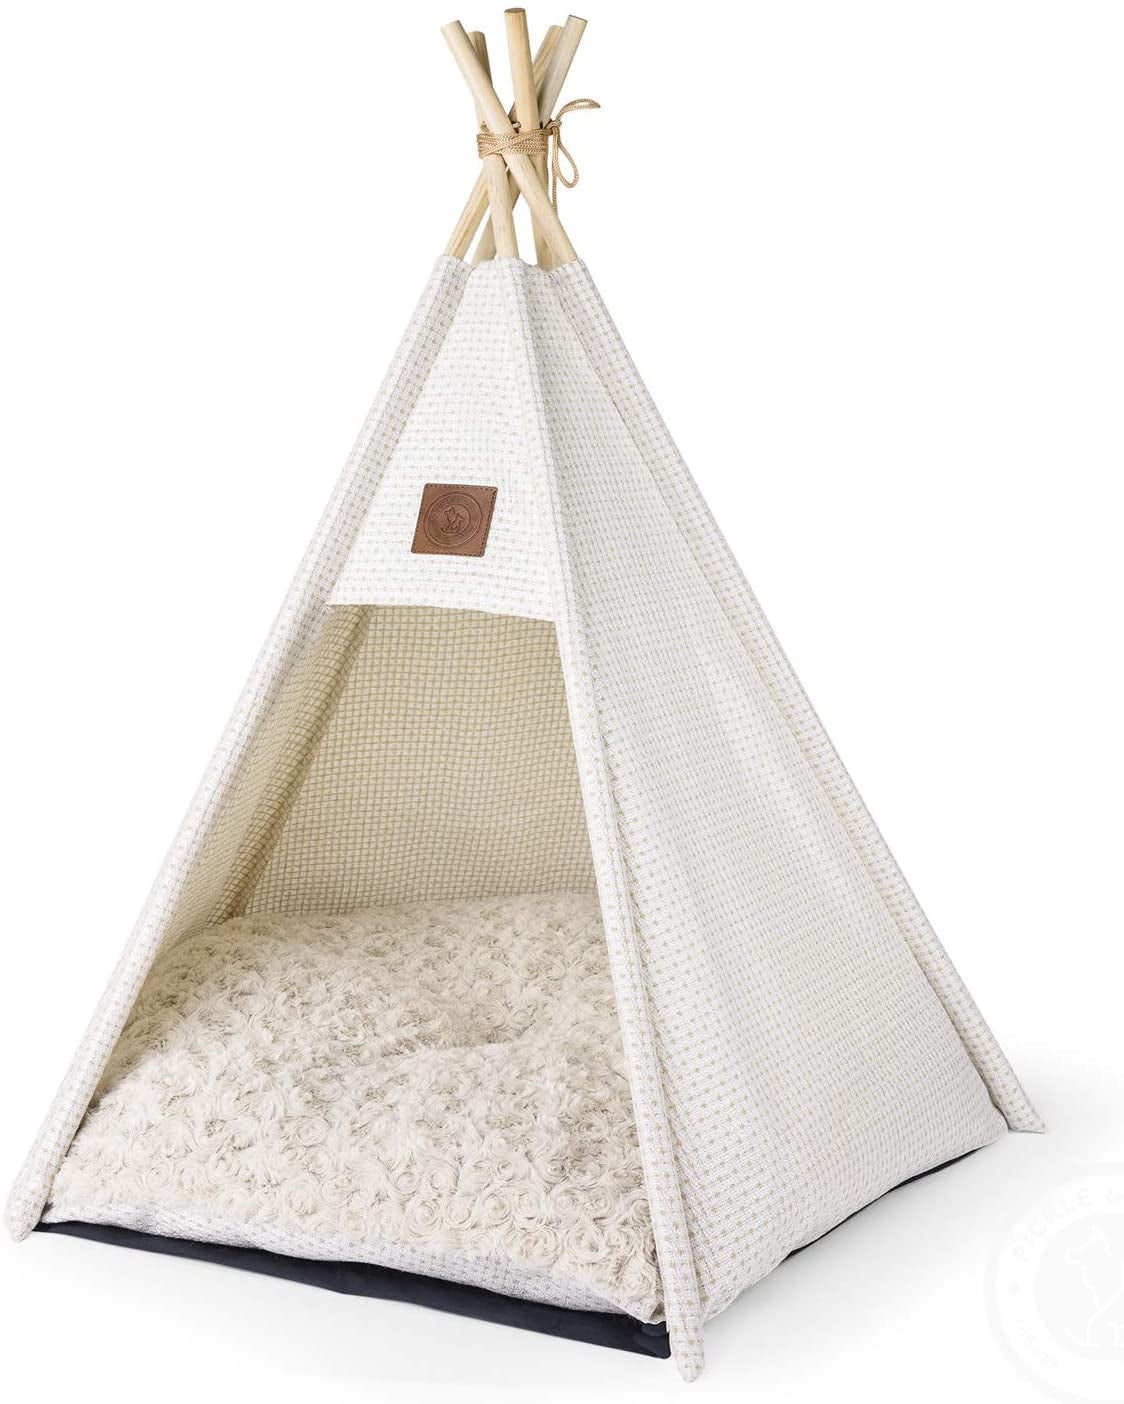 - Small to Medium Dog Teepee/Tent for Cats - Stylish, Soft, Cozy Bed W/Thick Plush Pad, Durable Fabric & Machine Washable (White)